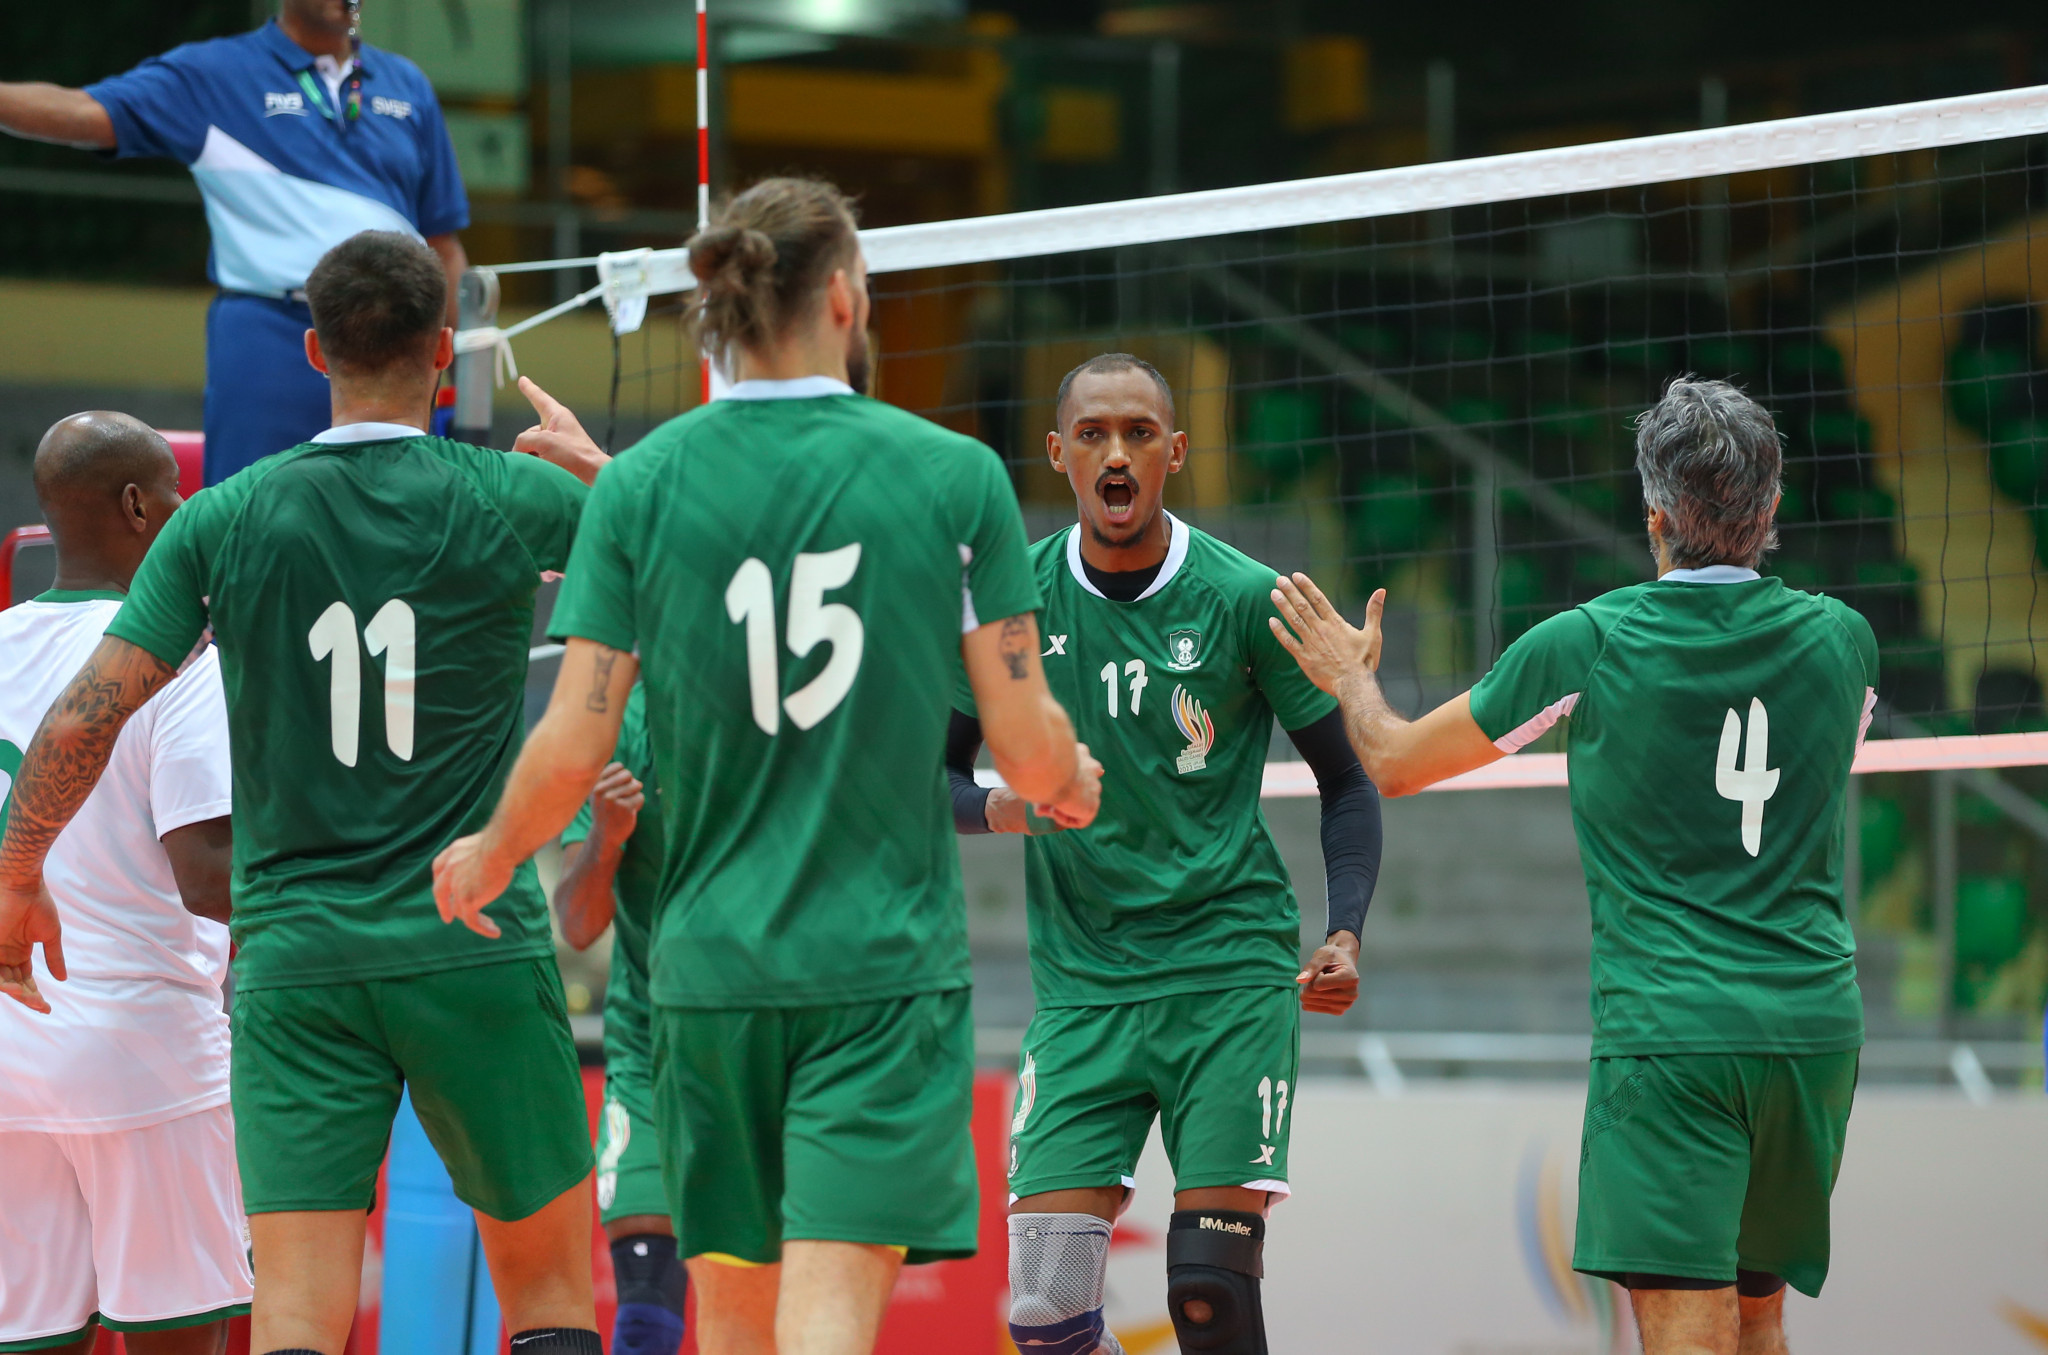 Al-Ahli recovered from a losing position to defeat Al-Hilal in the men's volleyball final ©Saudi Games